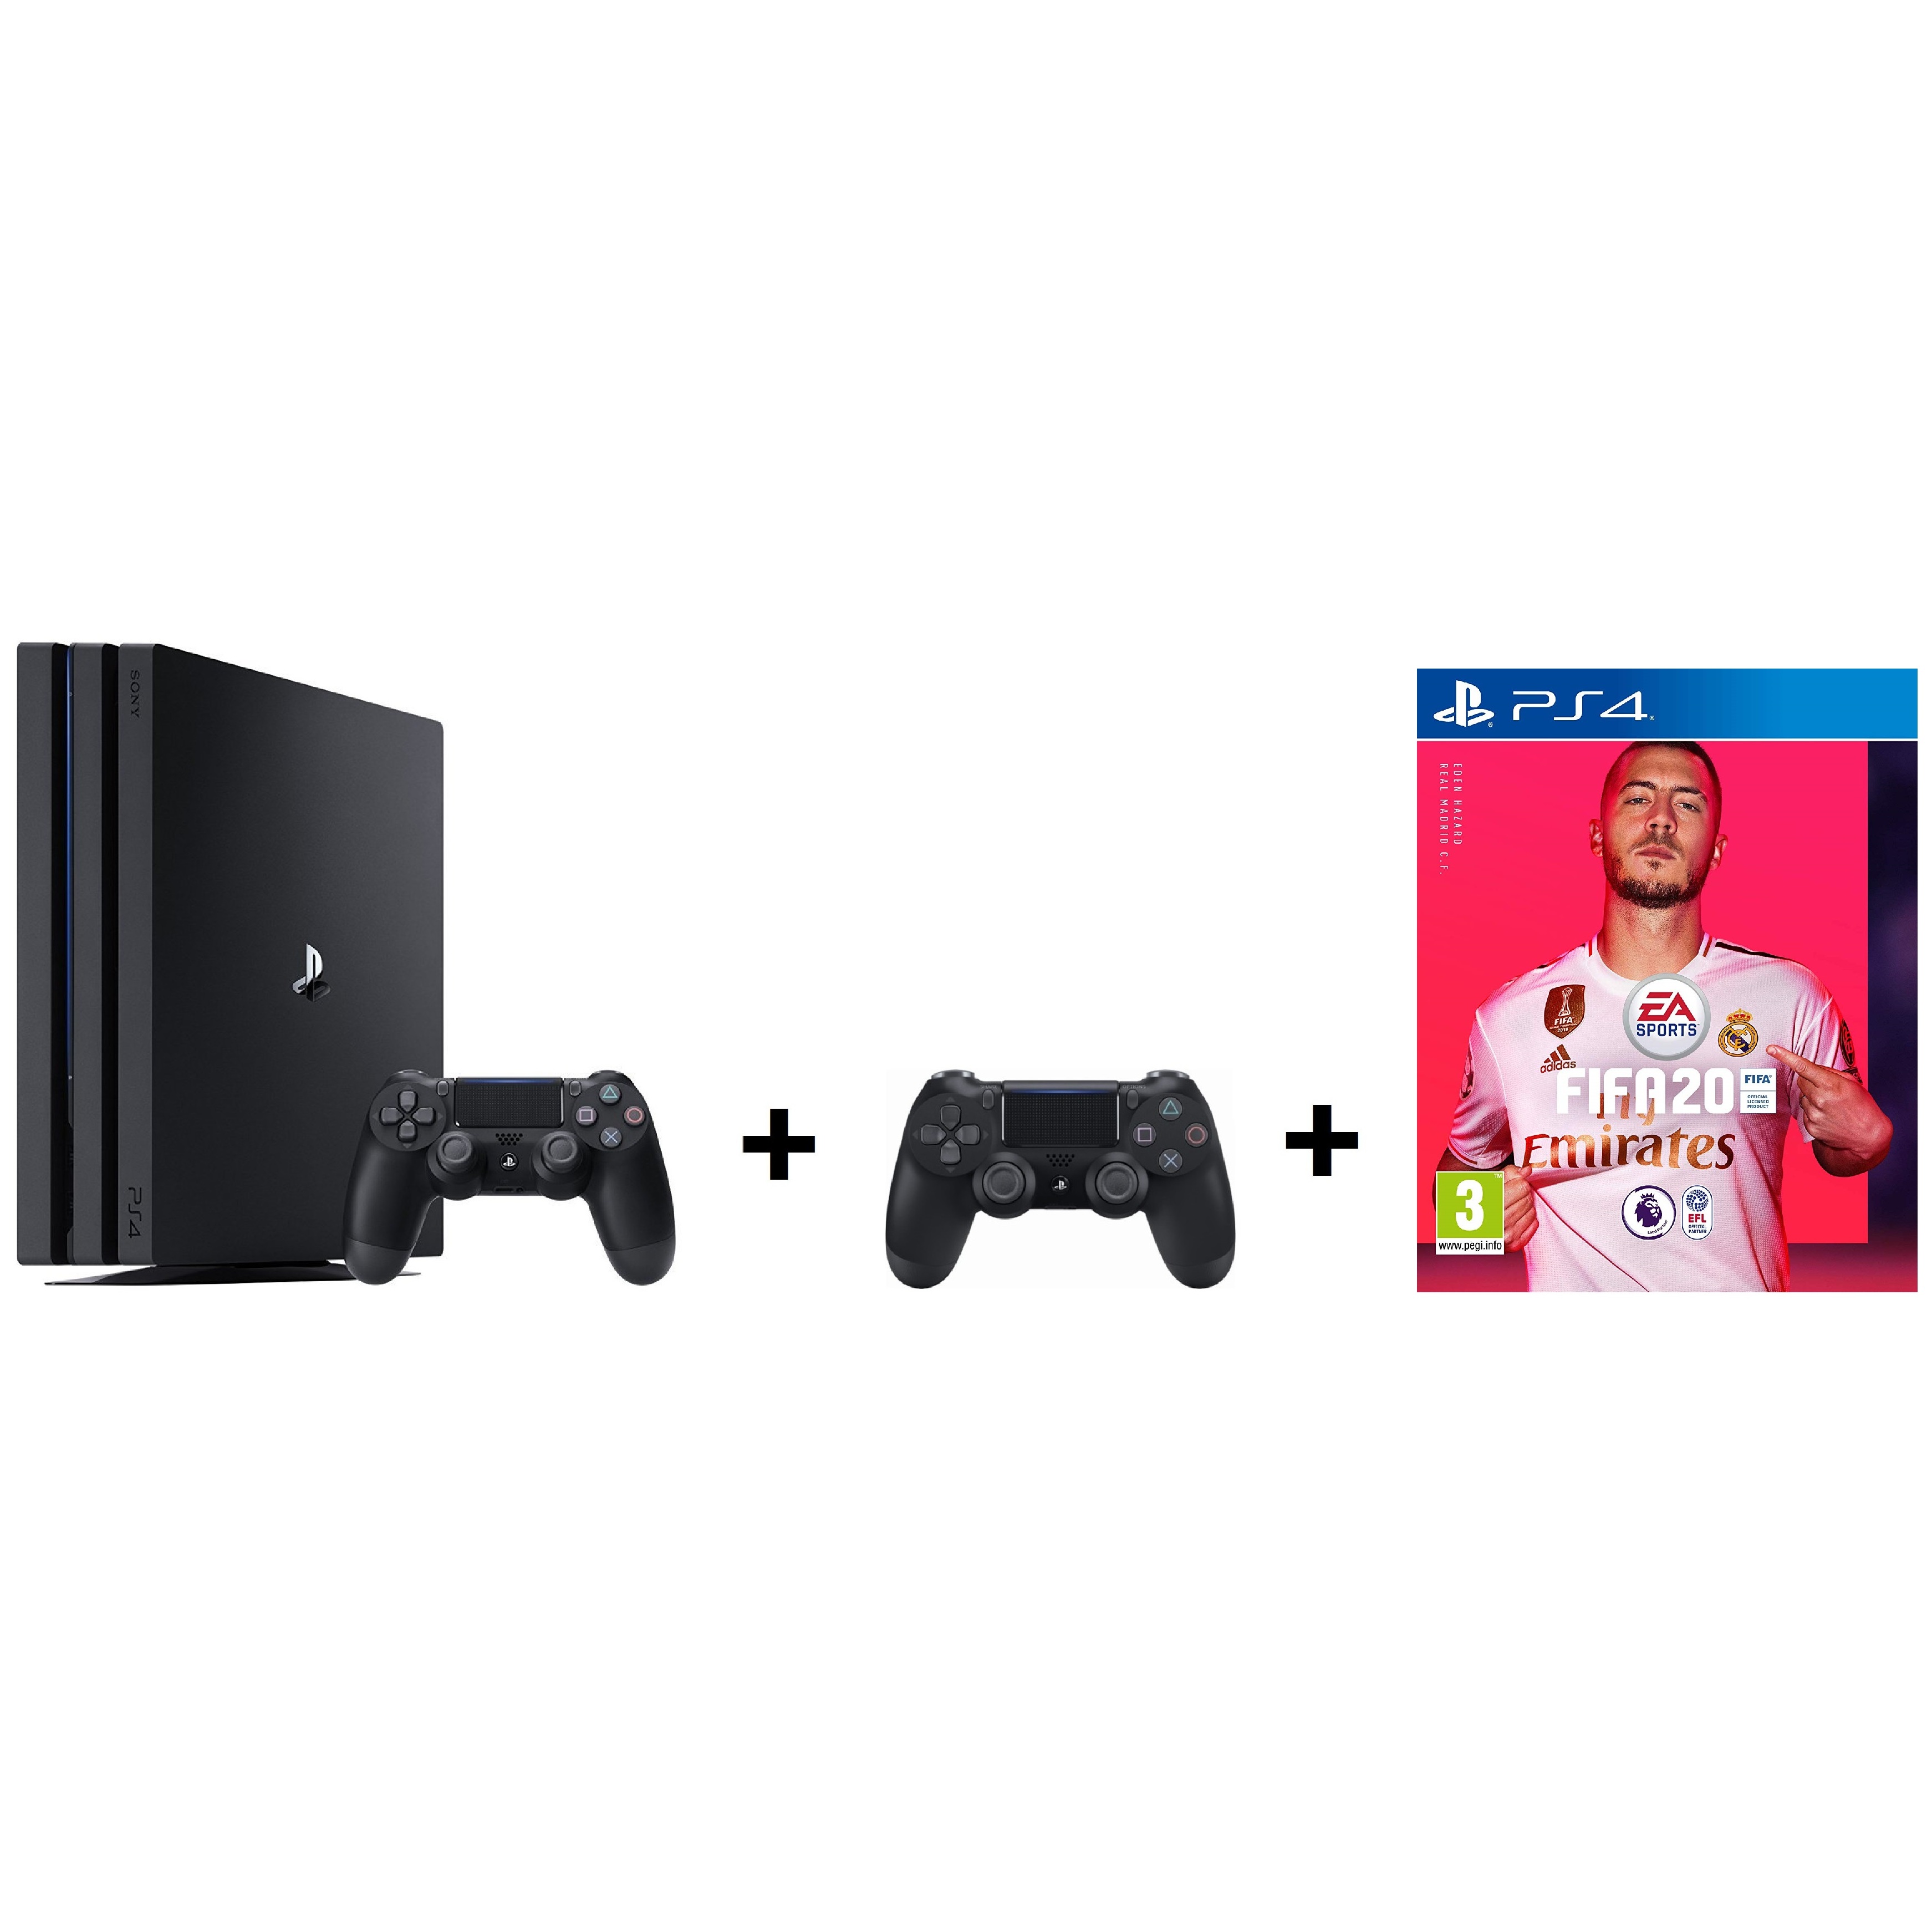 Buy Sony PS4 Pro Gaming Console 1TB Black + Extra + FIFA20 Game Online in UAE | Sharaf